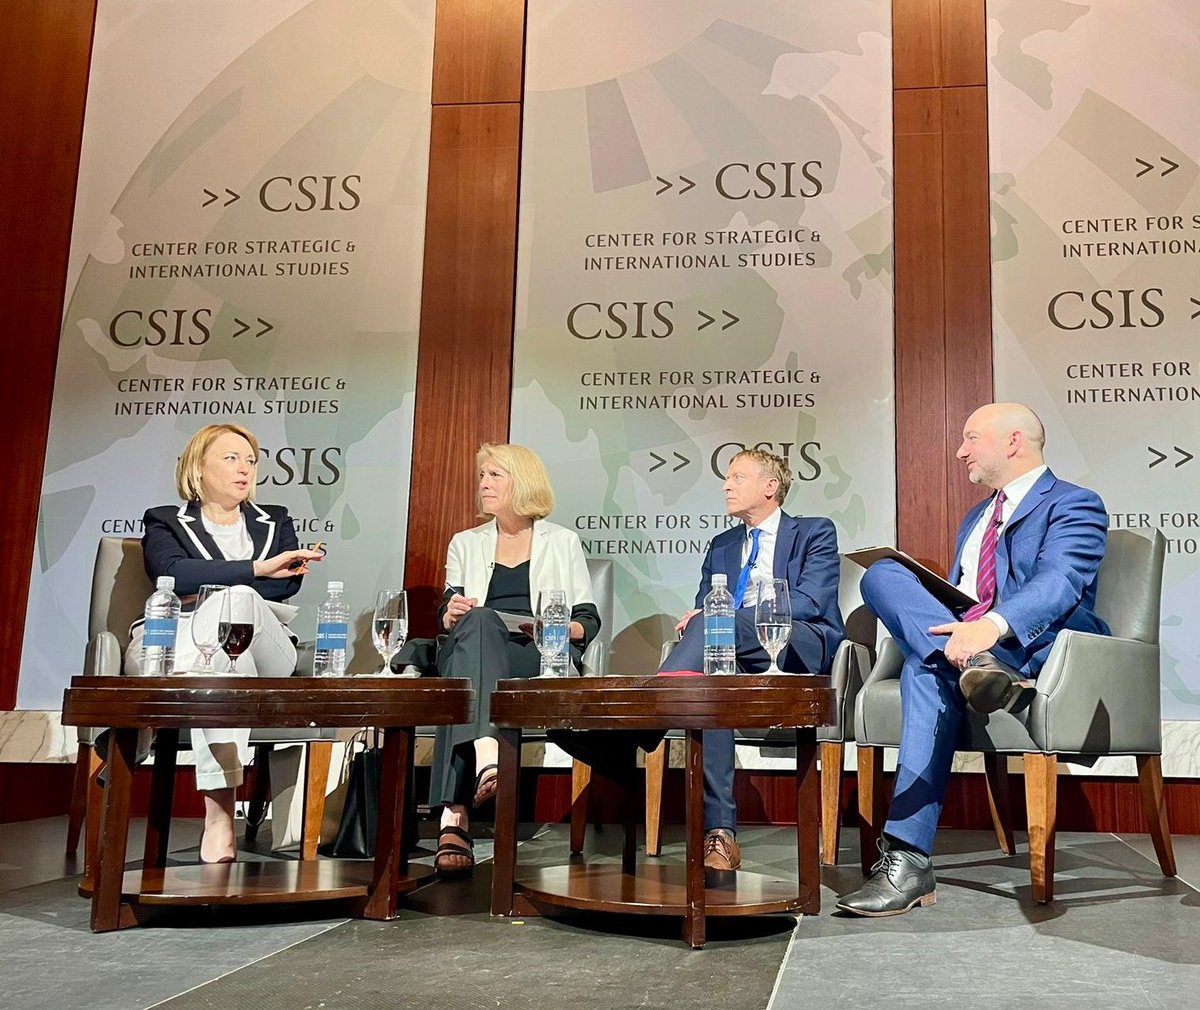 Strong messages before #EuropeDay: This is a huge year for democratic elections. With @CSIS & @InstitutJM, I shared how to ensure transatlantic unity during this time: advancing the digital/green transitions, preserving benefits of open markets & continued support for #Ukraine.